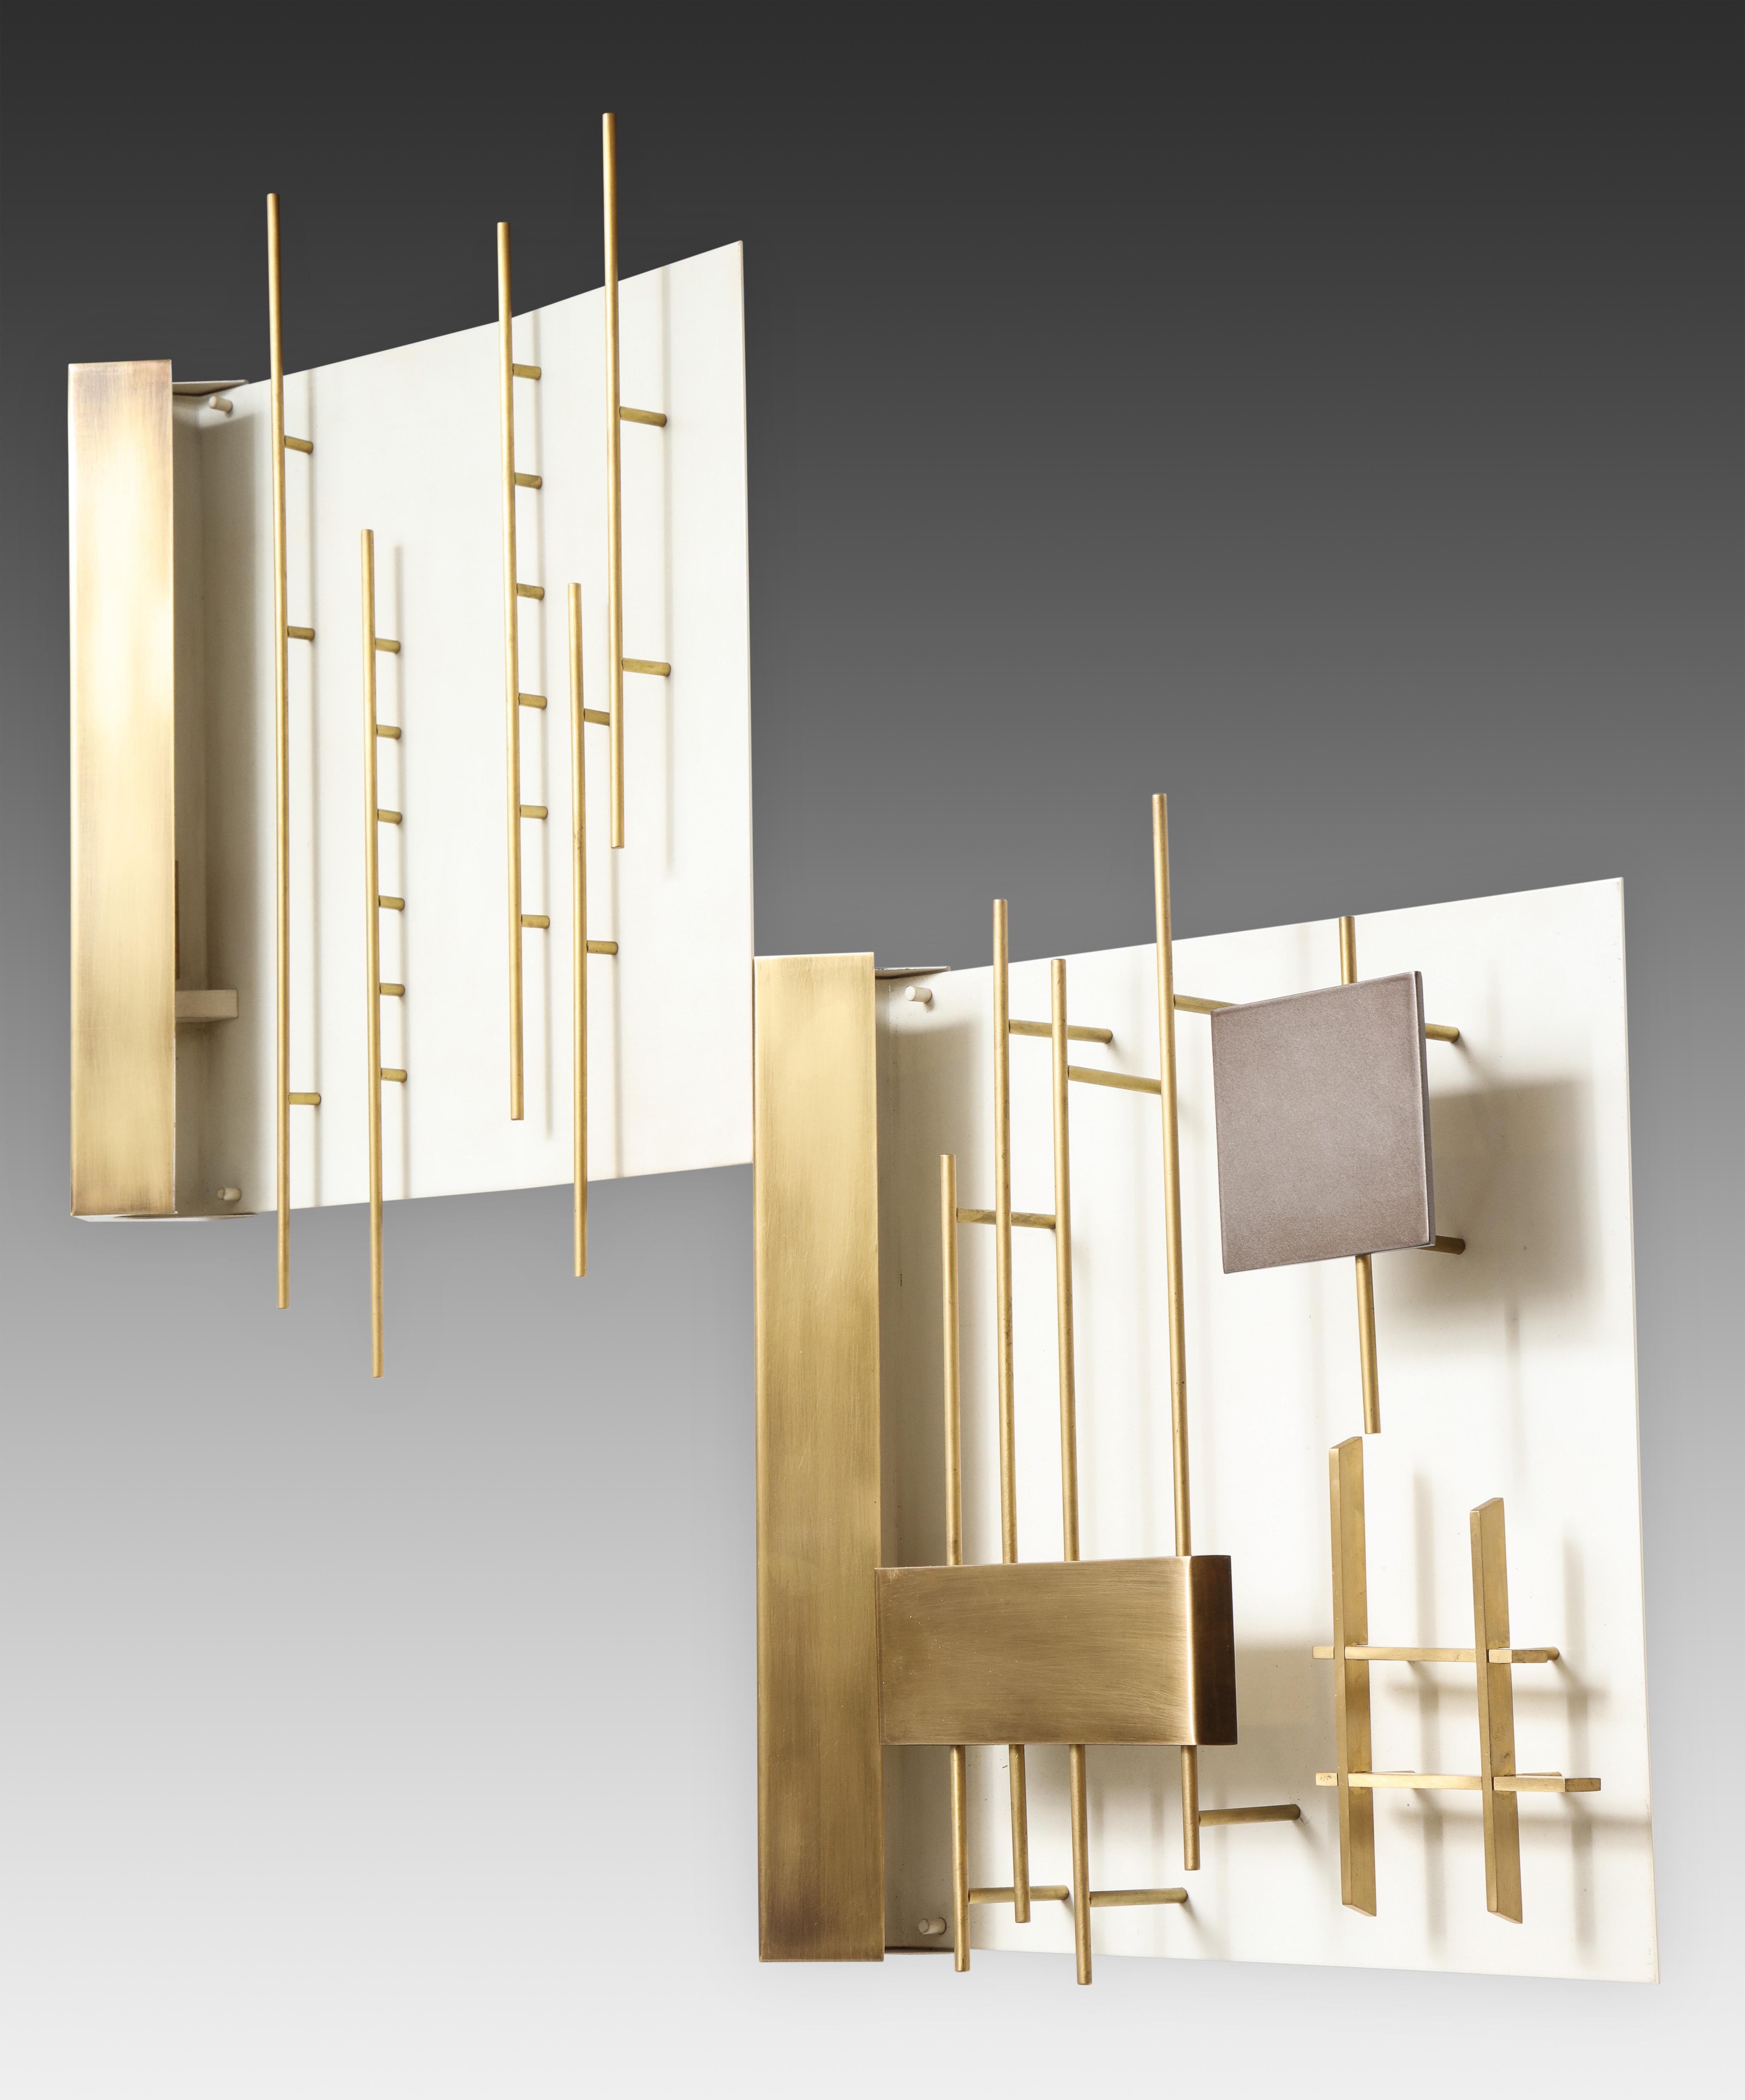 Designed by Gio Ponti for Lumi, rare pair of first edition 'Quadri Luminosi' sconces models 575 and 576, Italy, circa 1960. Brass and enameled brass architectural rods and geometric shapes sculpturally mounted on white enameled metal. The light